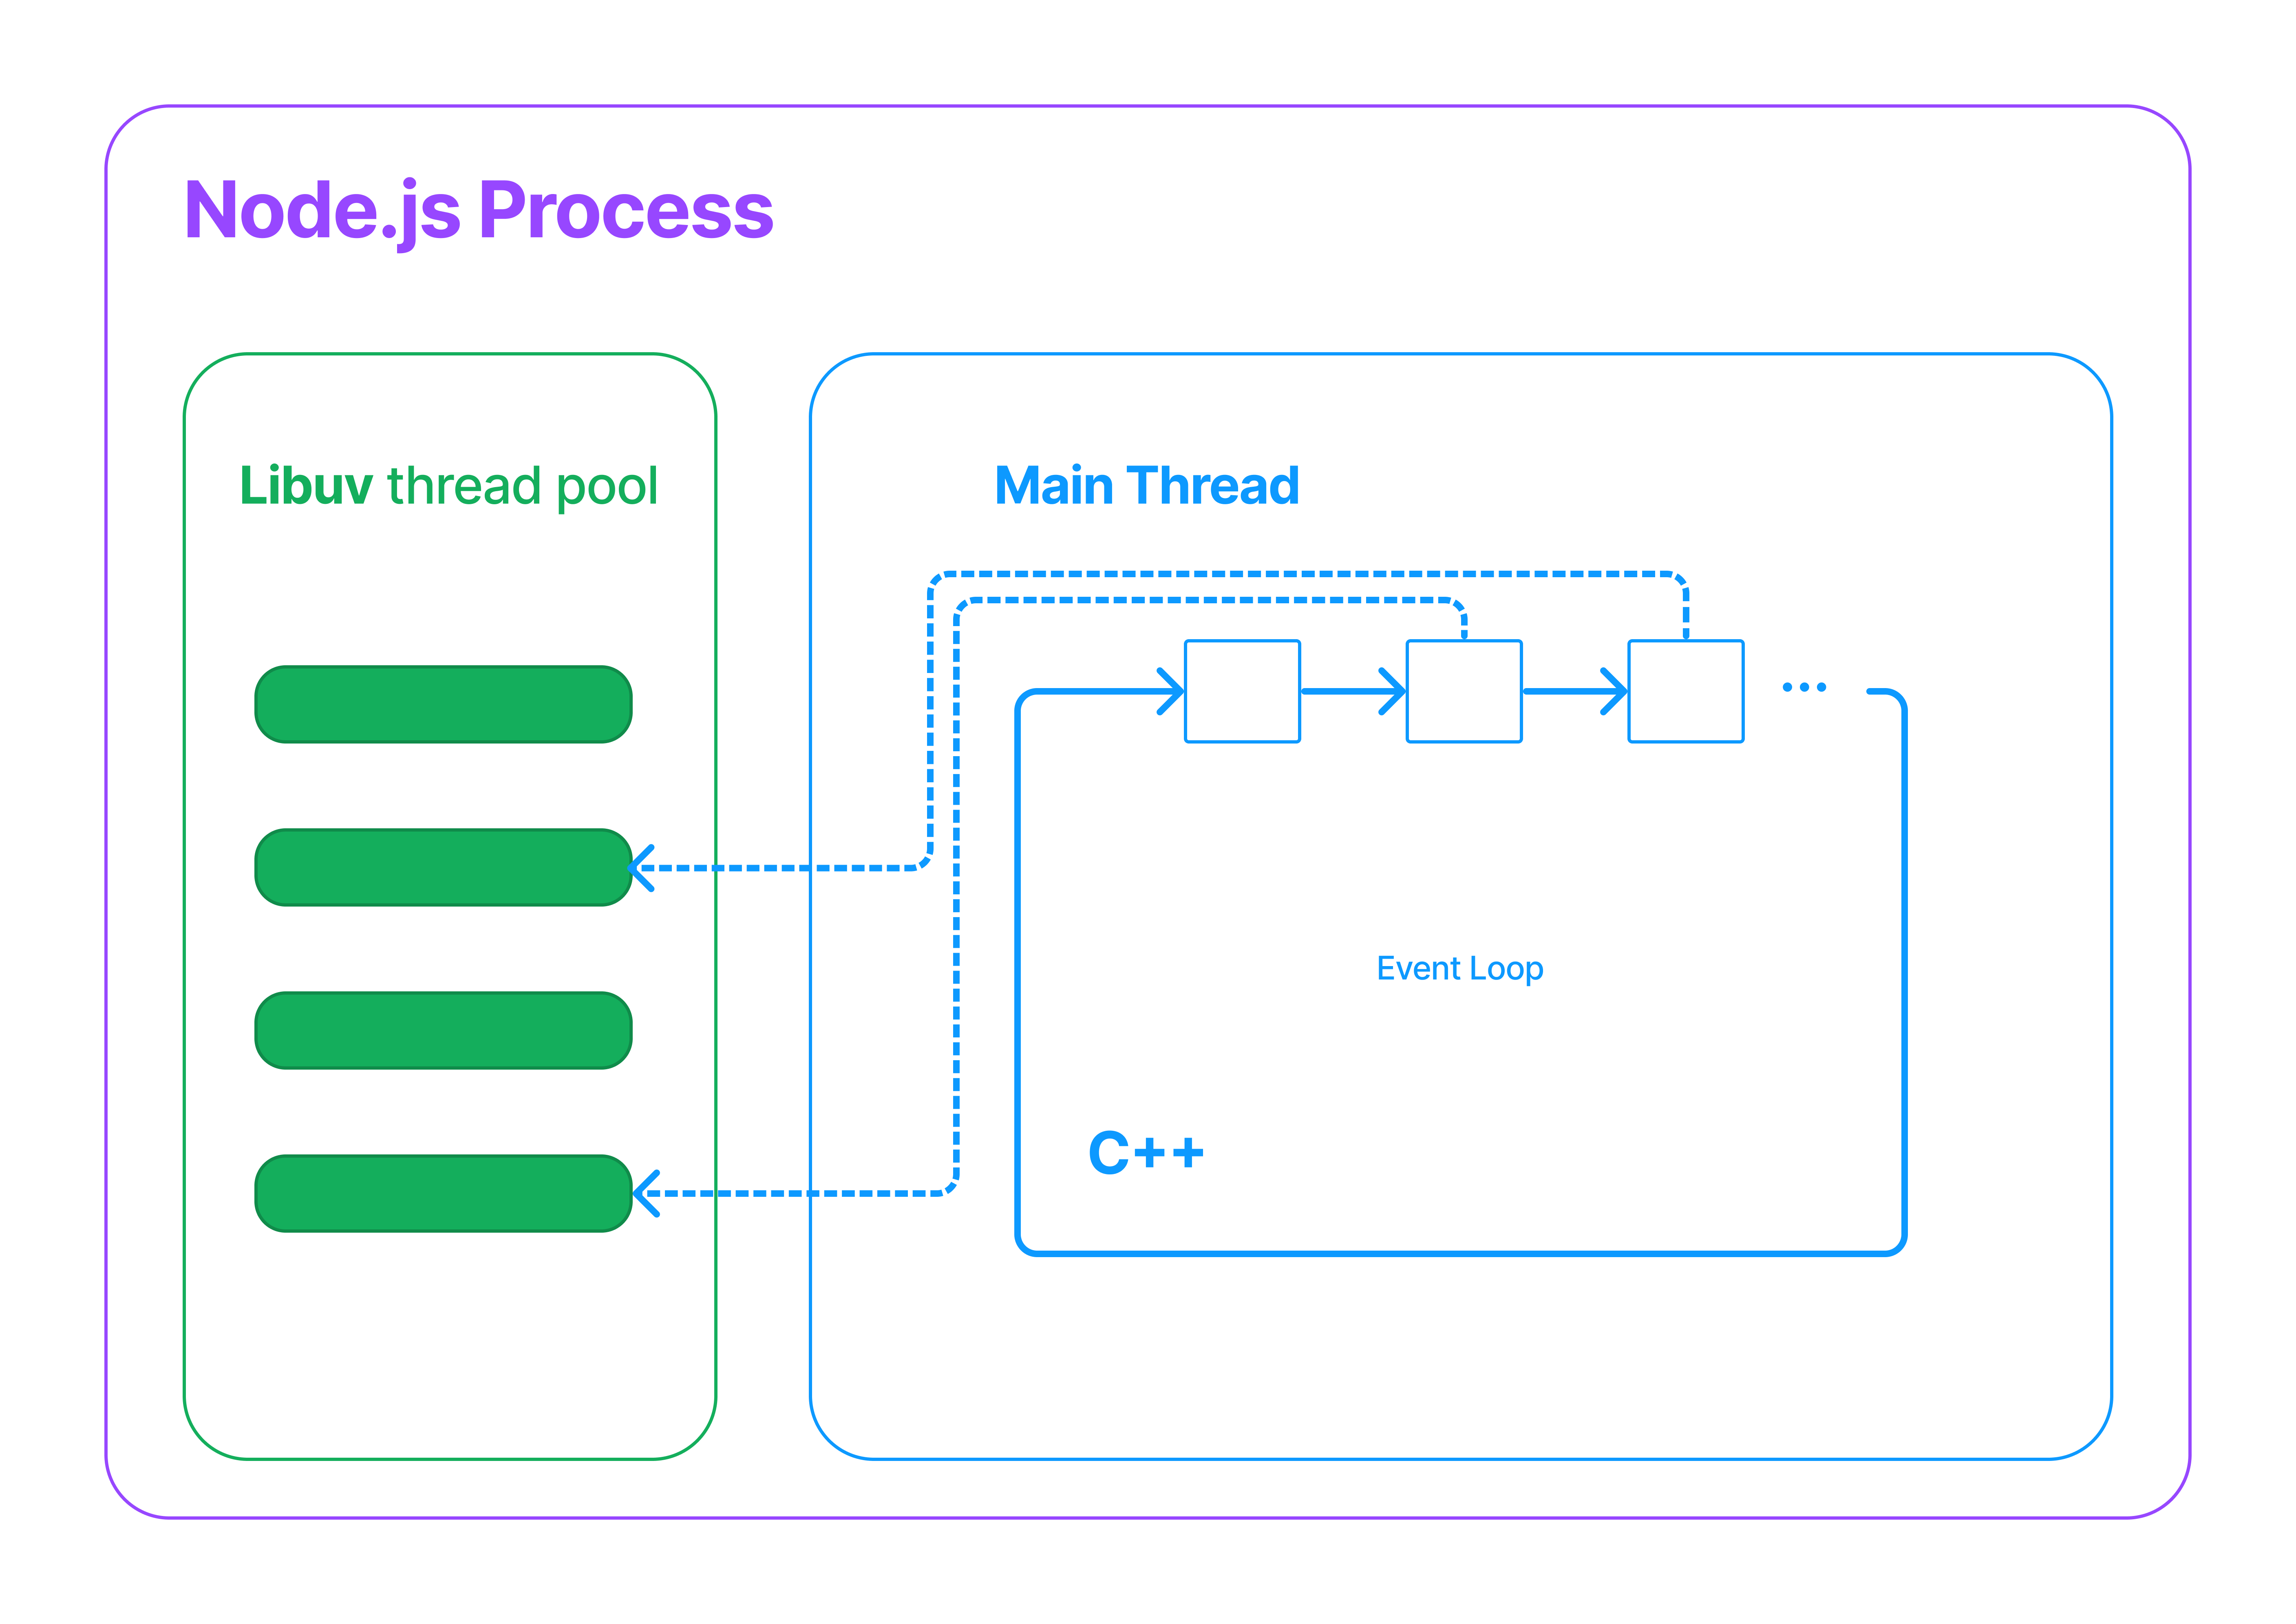 The event loop steps using Libuv threads